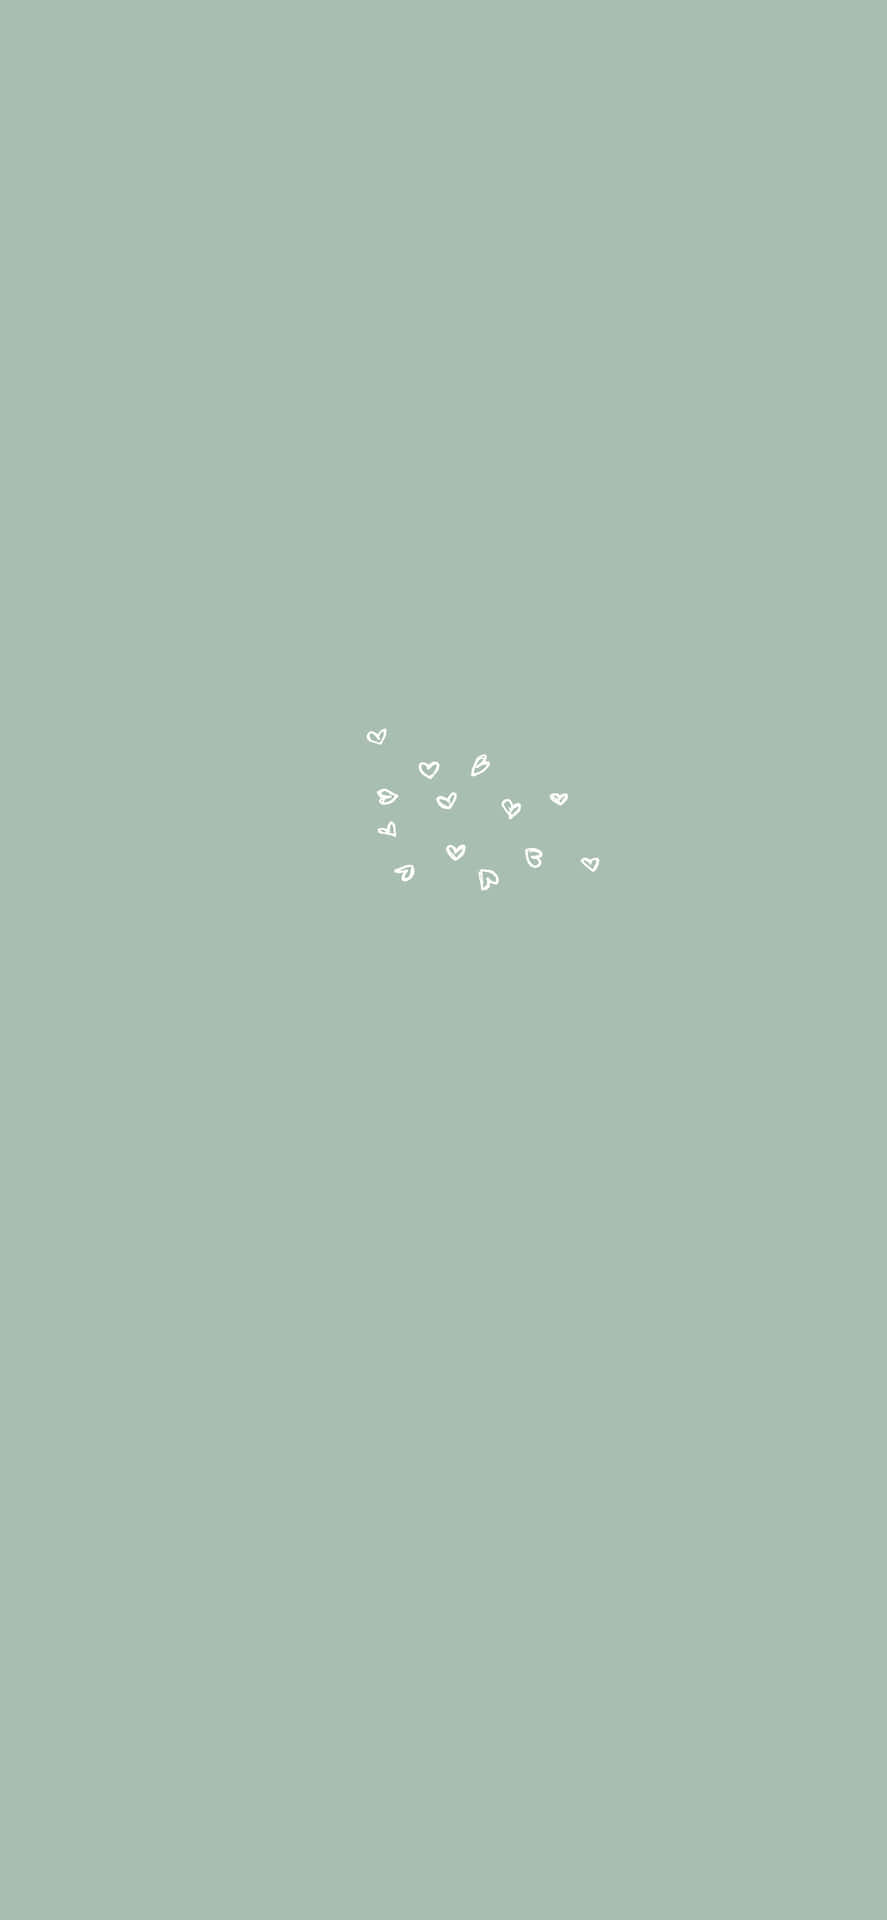 Tiny White Hearts Sage Aesthetic Wallpaper